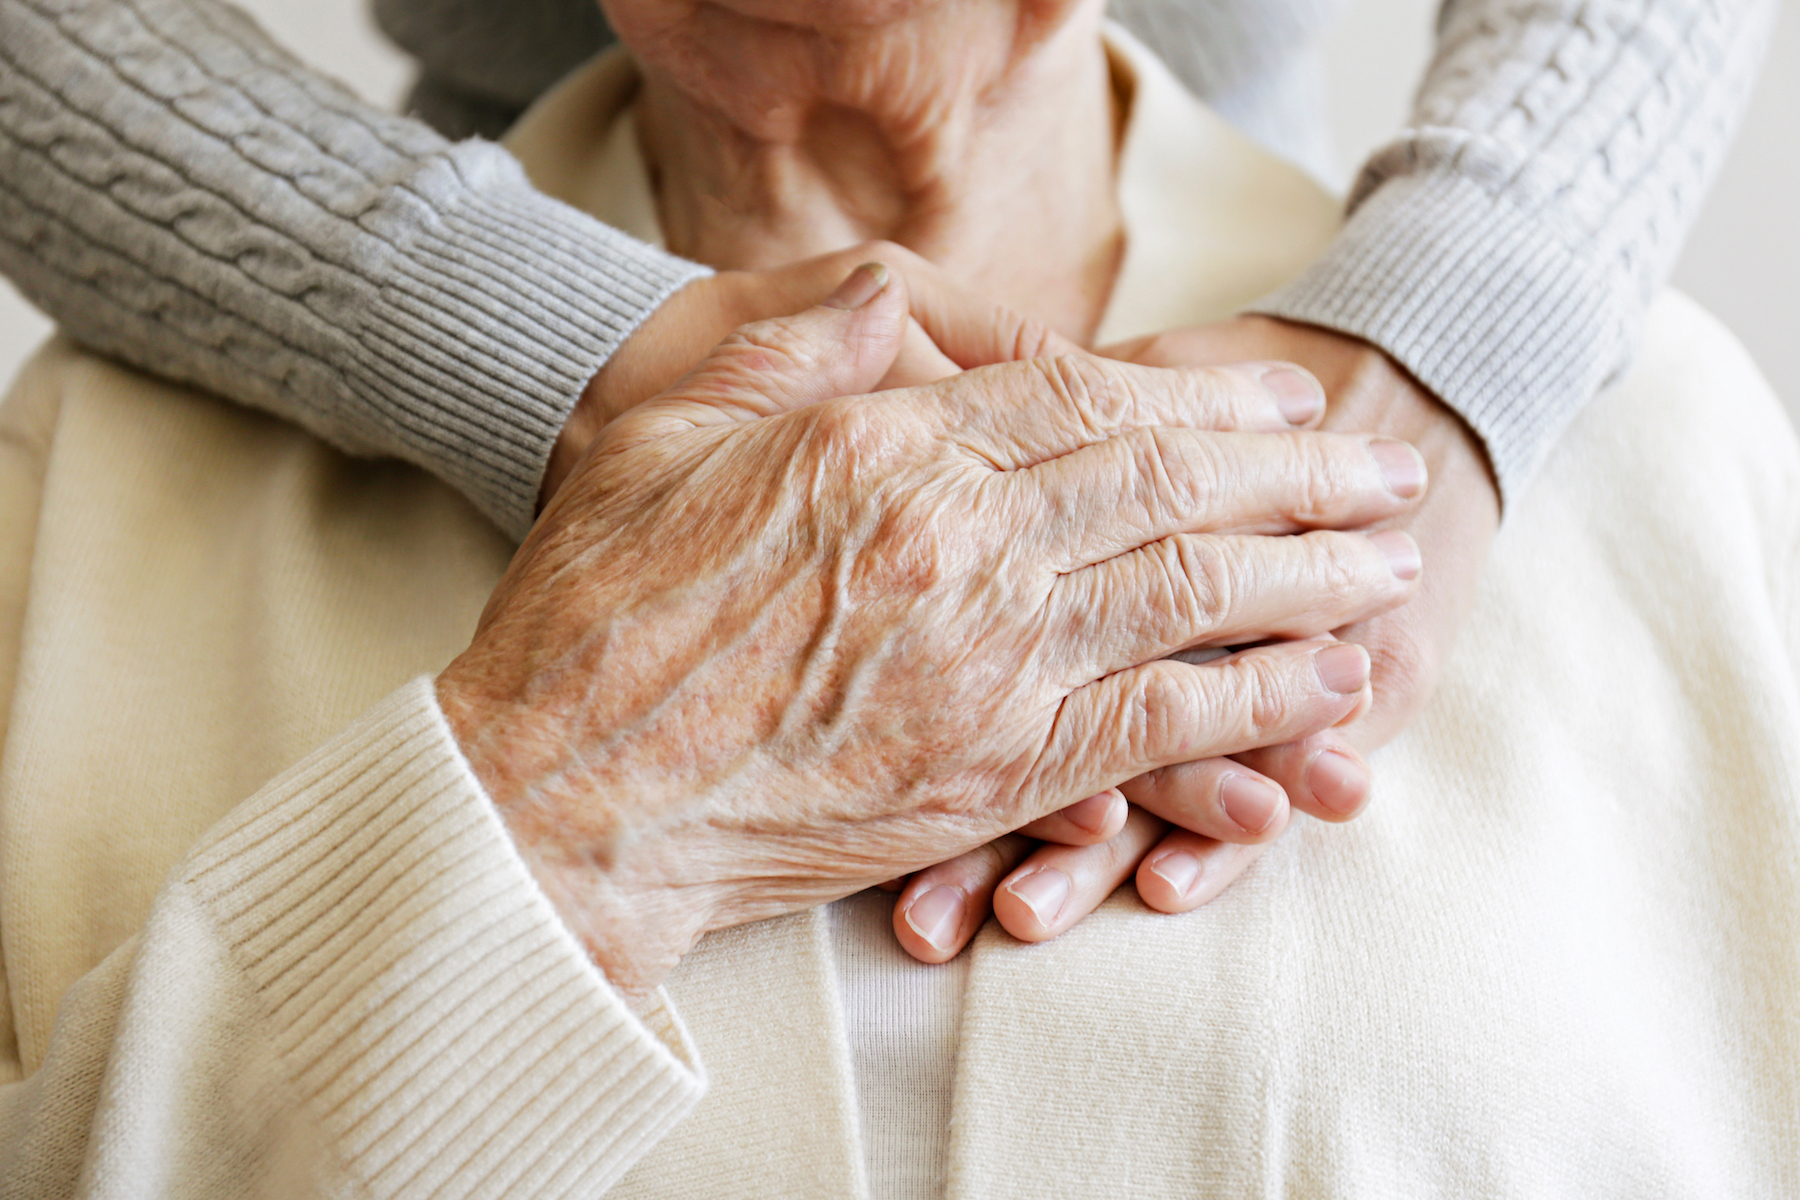 Aged care providers call for wealthy residents to pay more